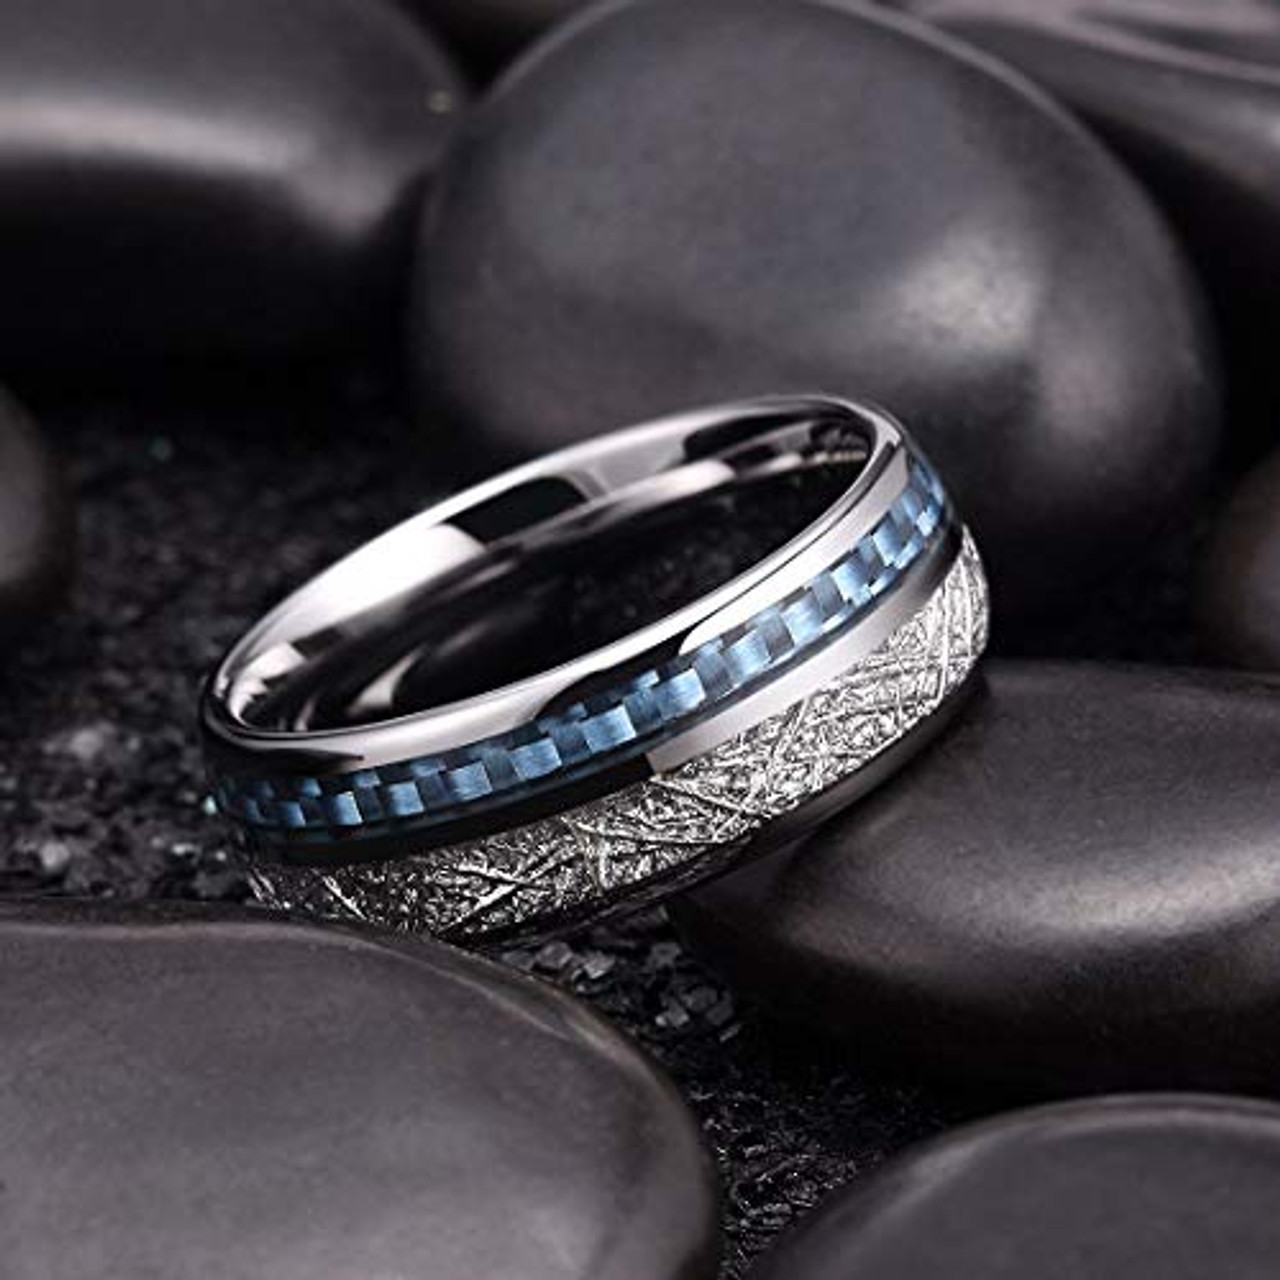 (8mm) Unisex, Women's or Men's Tungsten Carbide Wedding ring band. Domed Silver Band with Blue Carbon Fiber and Inspired Meteorite Inlay Ring